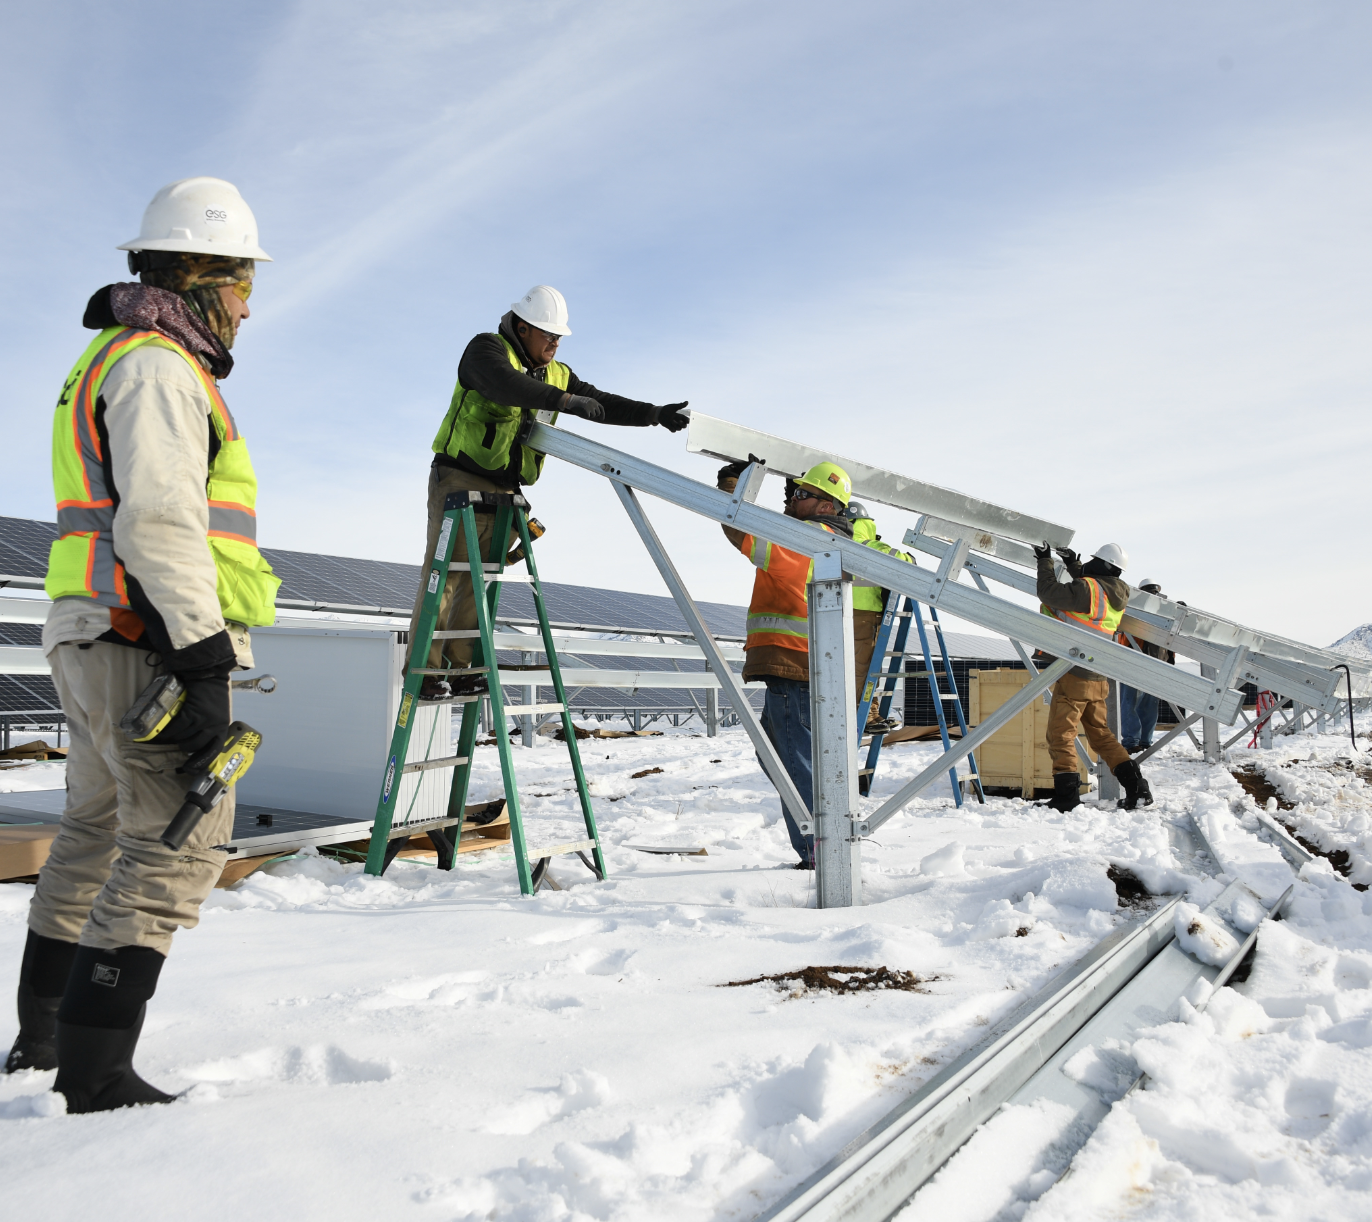 Workers assembling solar panels in the snow